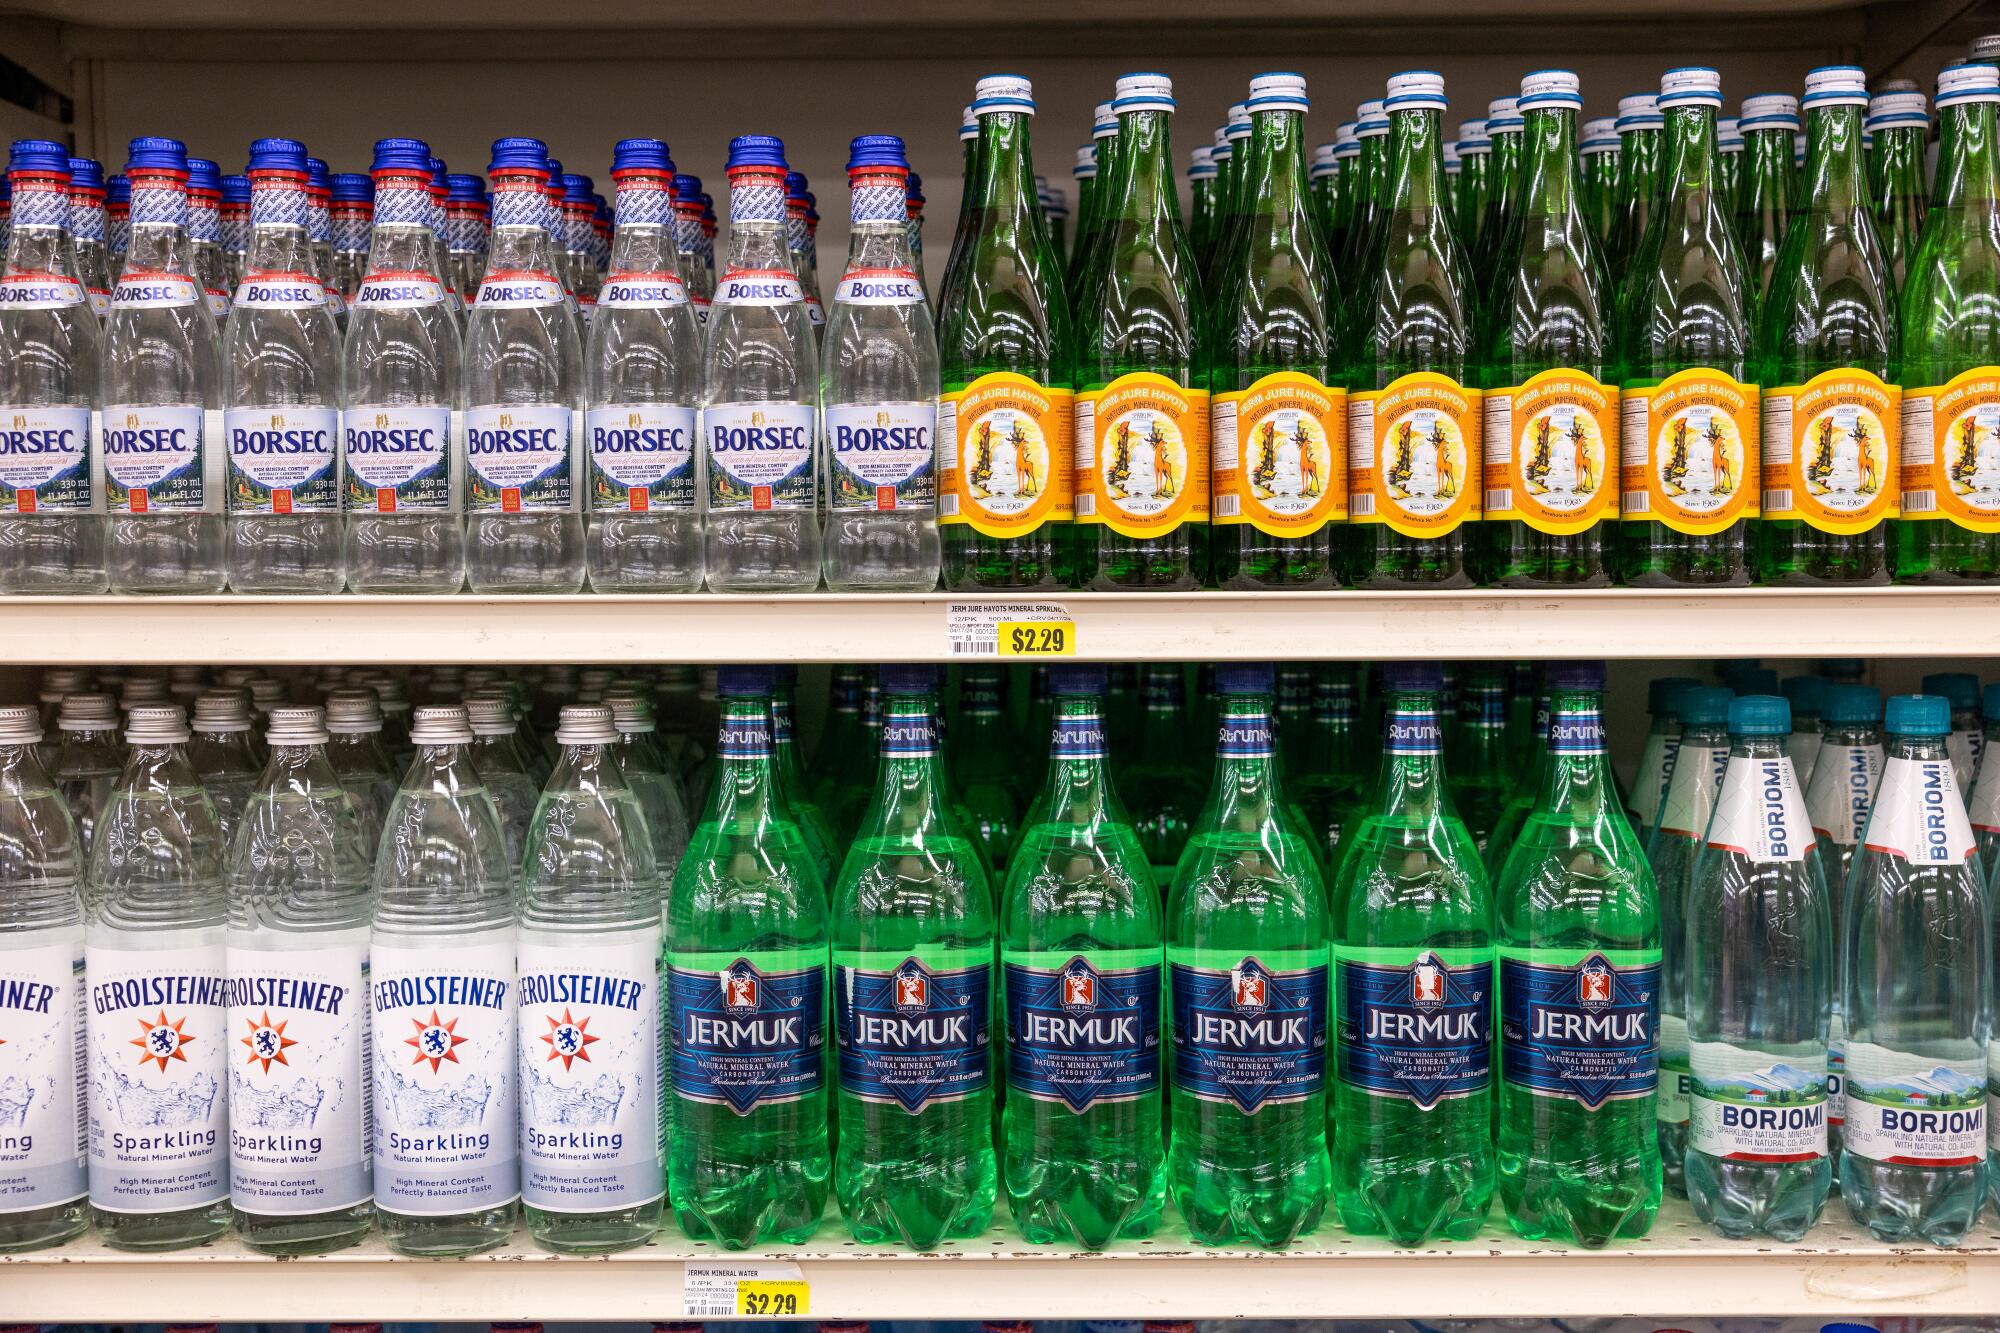 Assorted bottles of mineral water in sections on two shelves